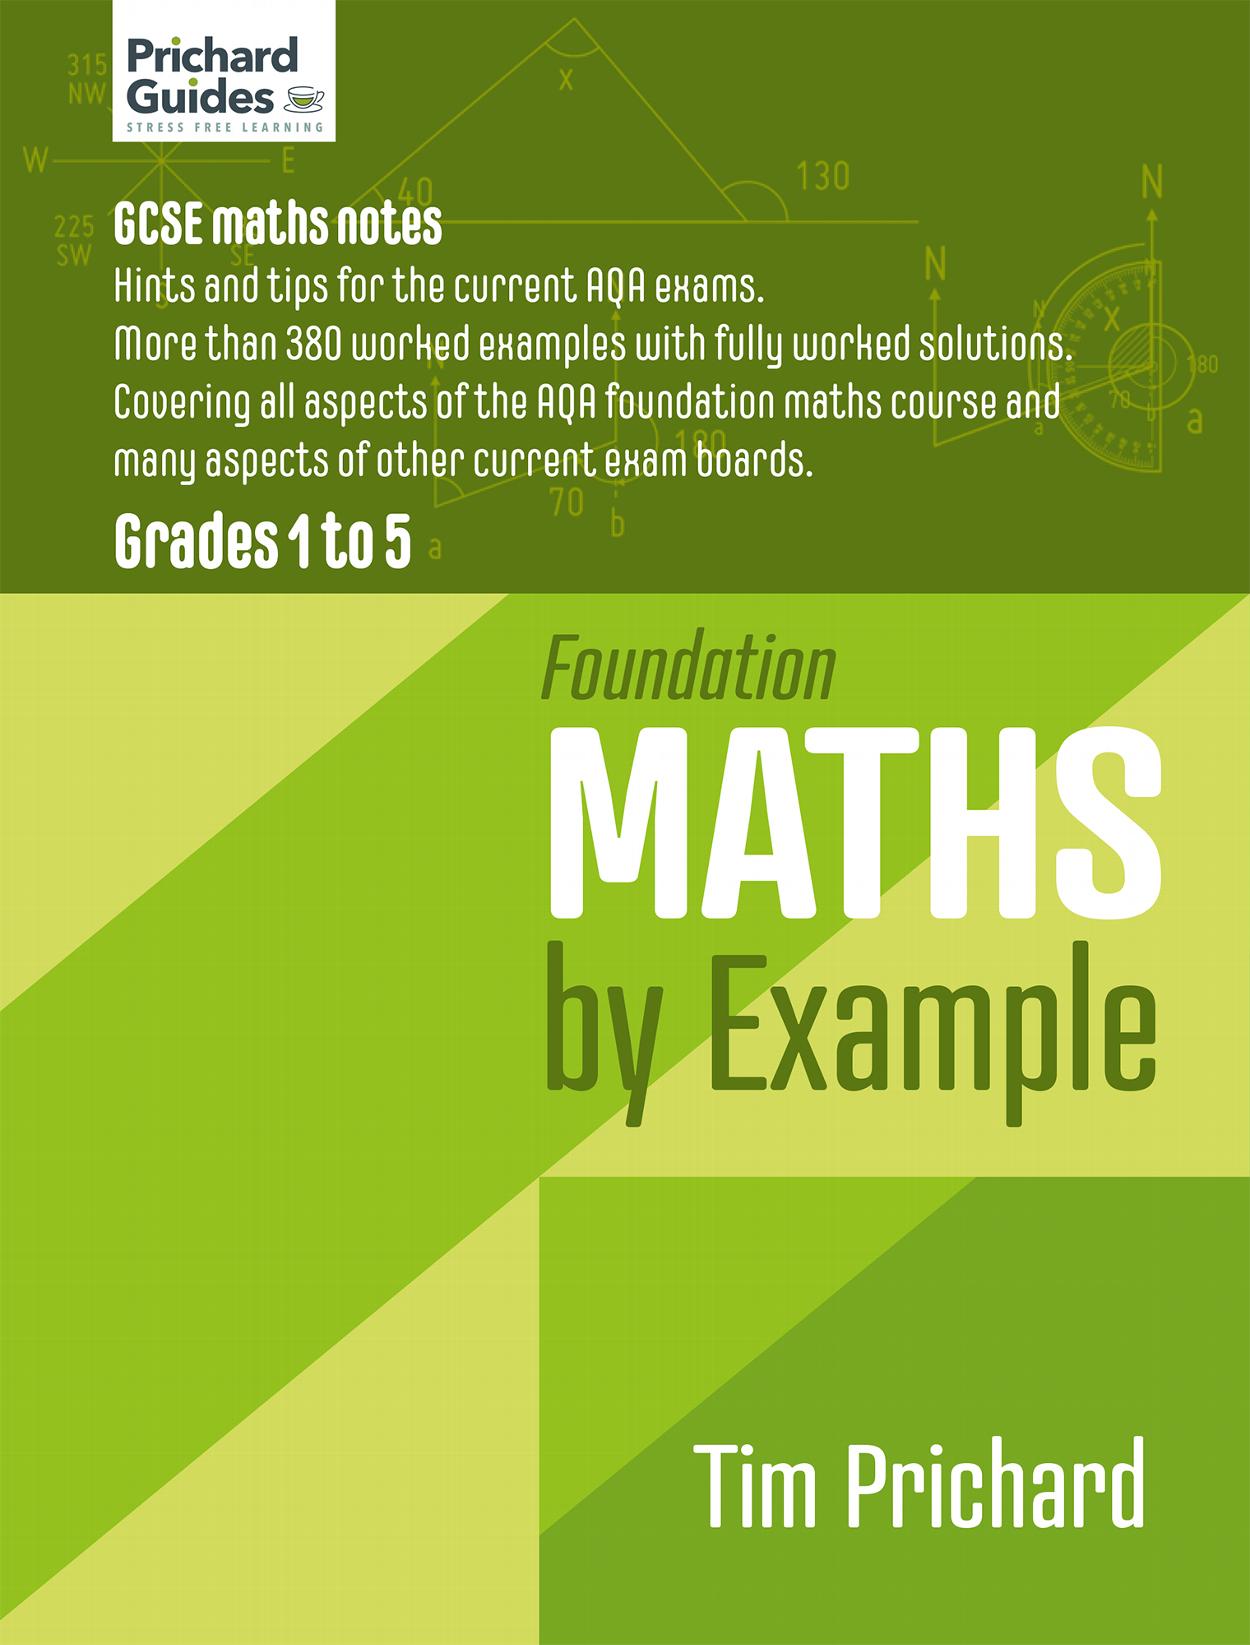 Products | gcse science revision guide in UK gallery image 4